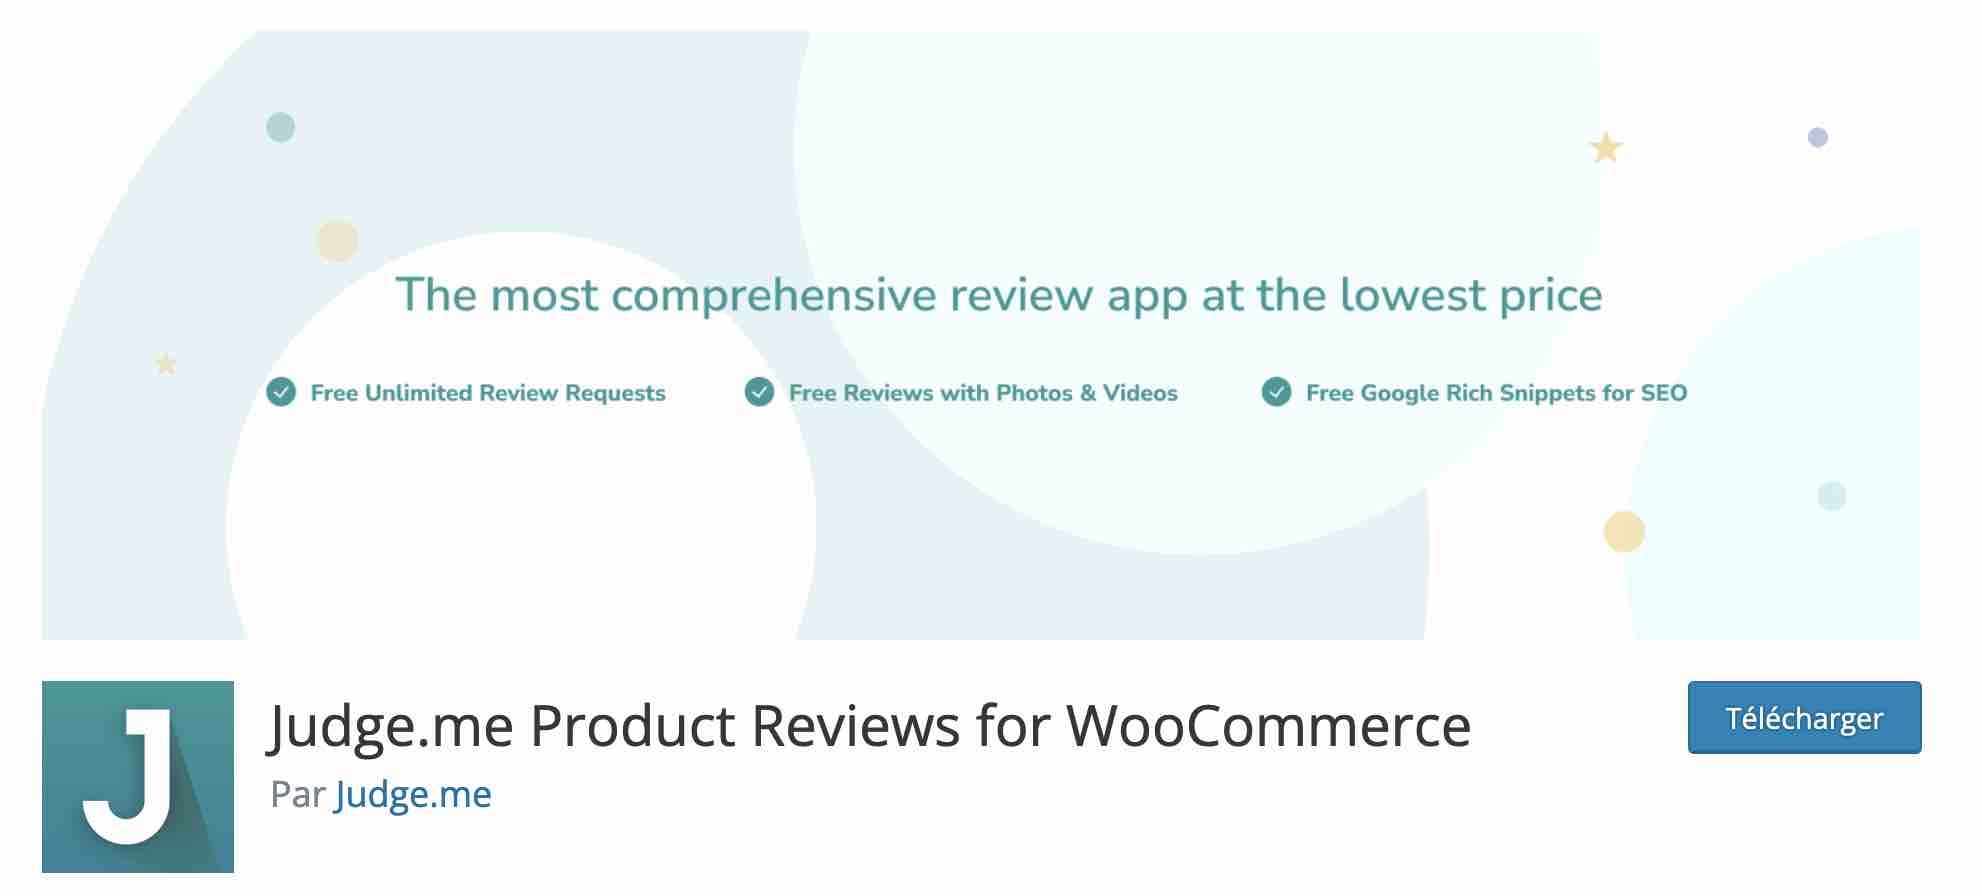 Judge.me Product Reviews for WooCommerce.